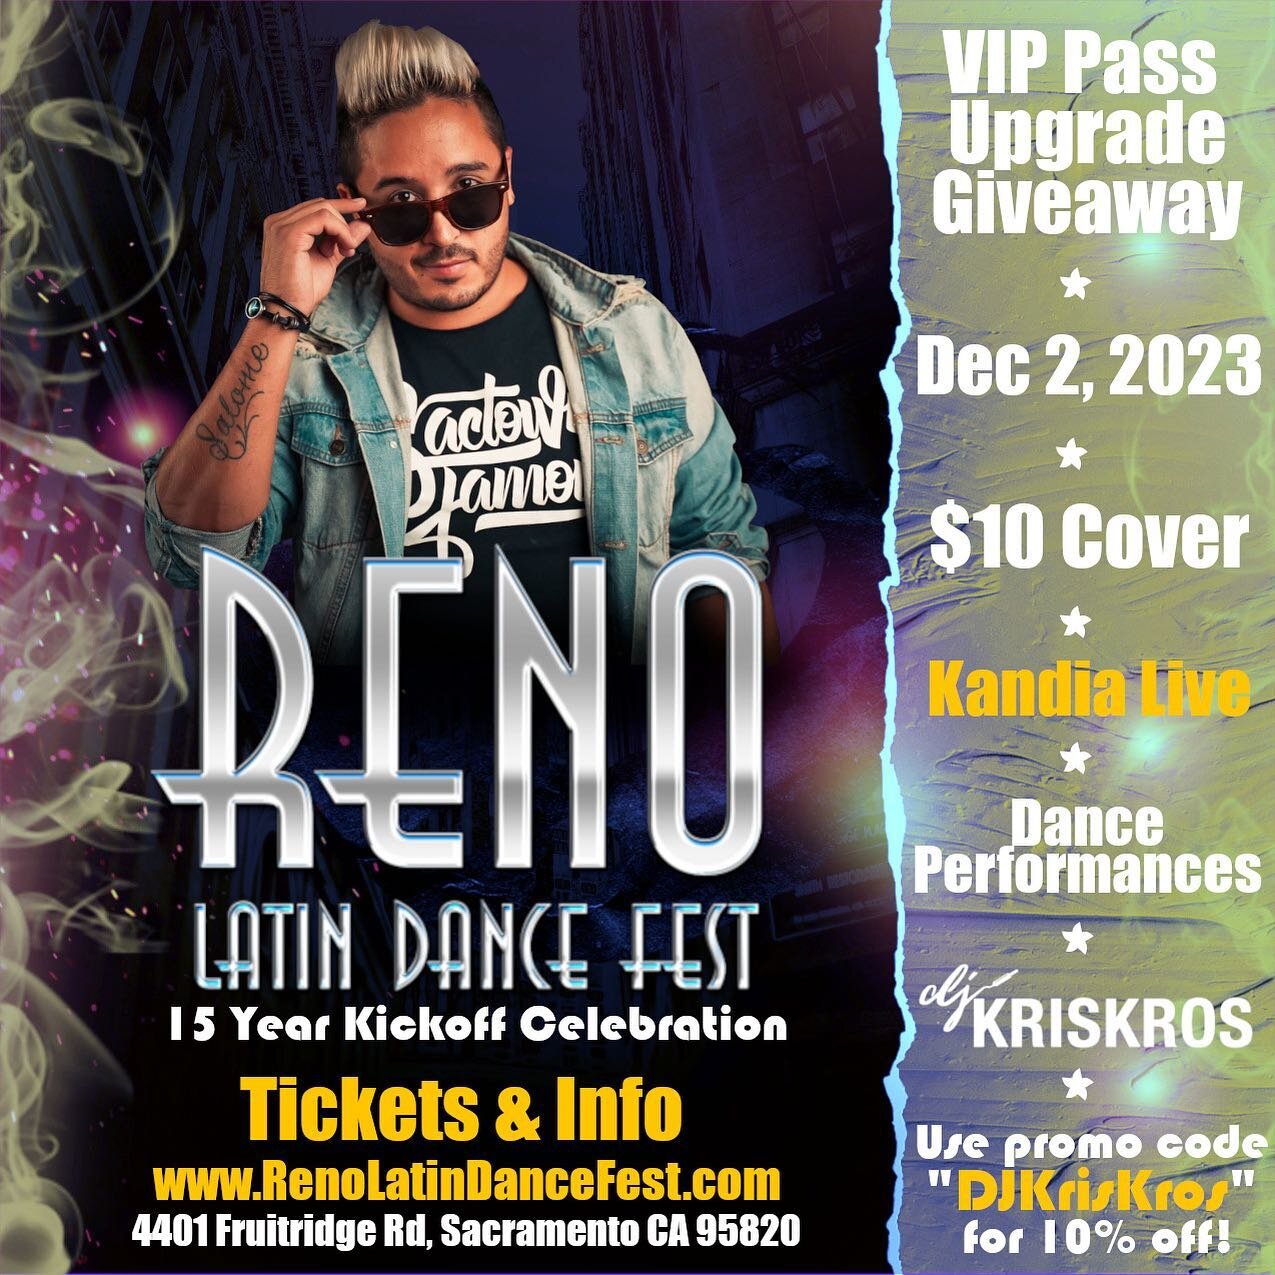 MI GENTE !!! This Friday the place to be is our Reno Latin Dance Fest TM kickoff party! Featuring @kandiag , dance performances, DJ @djkriskros , and a VIP Upgrade giveaway! This is a MASSIVE festival and it's their 15th year so we're bringing it all